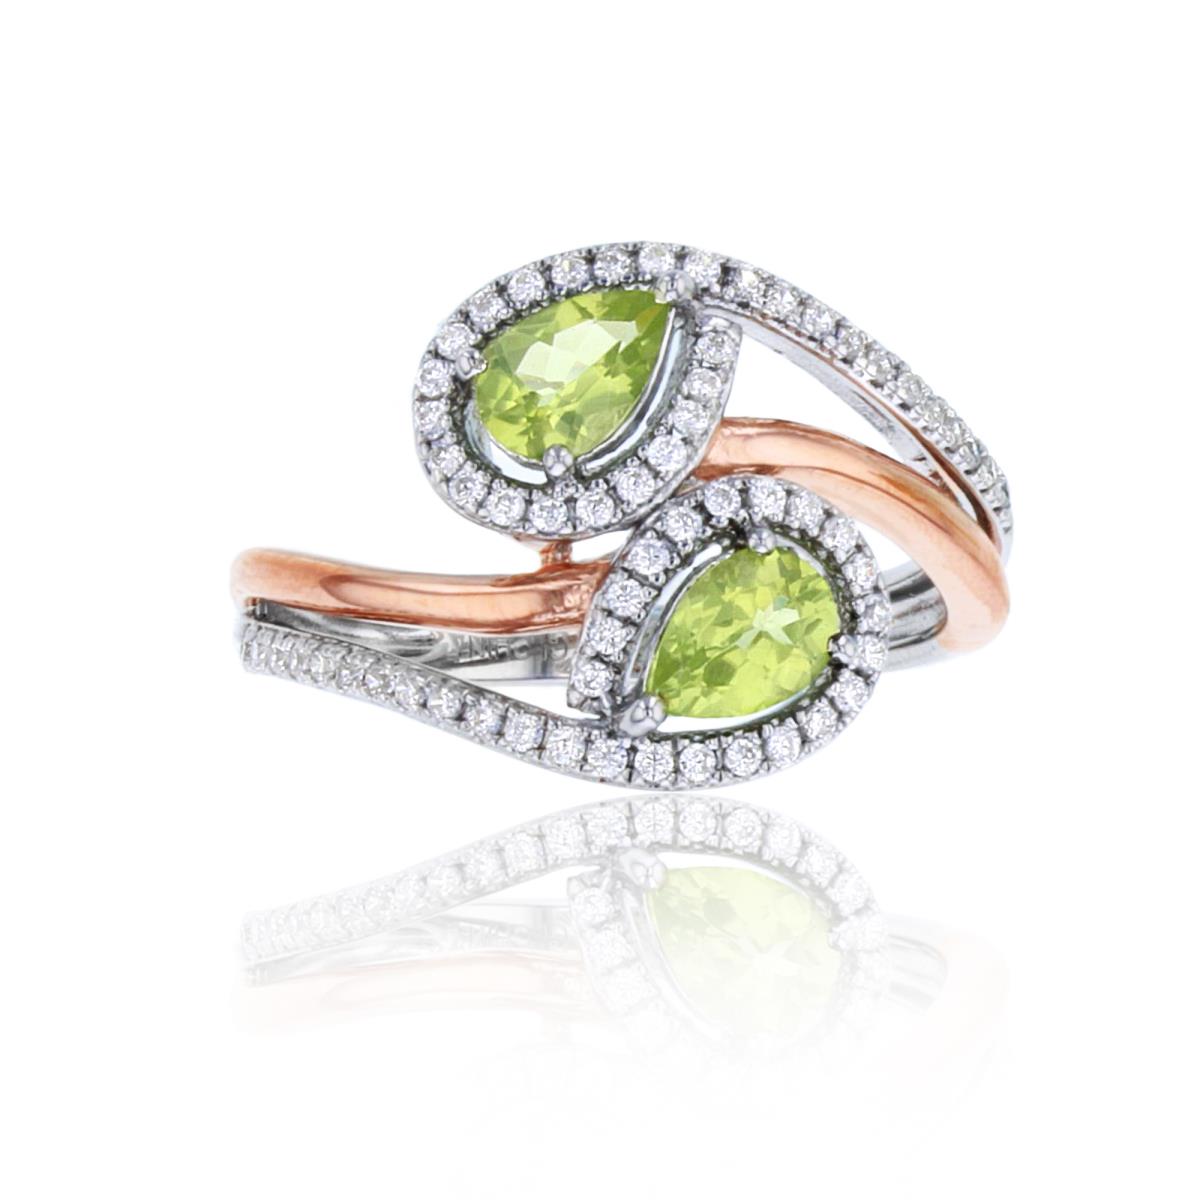 Sterling Silver+1Micron 14K Rose Gold Rnd CZ & 6x4mm PS Peridot Bypass Halo Ring